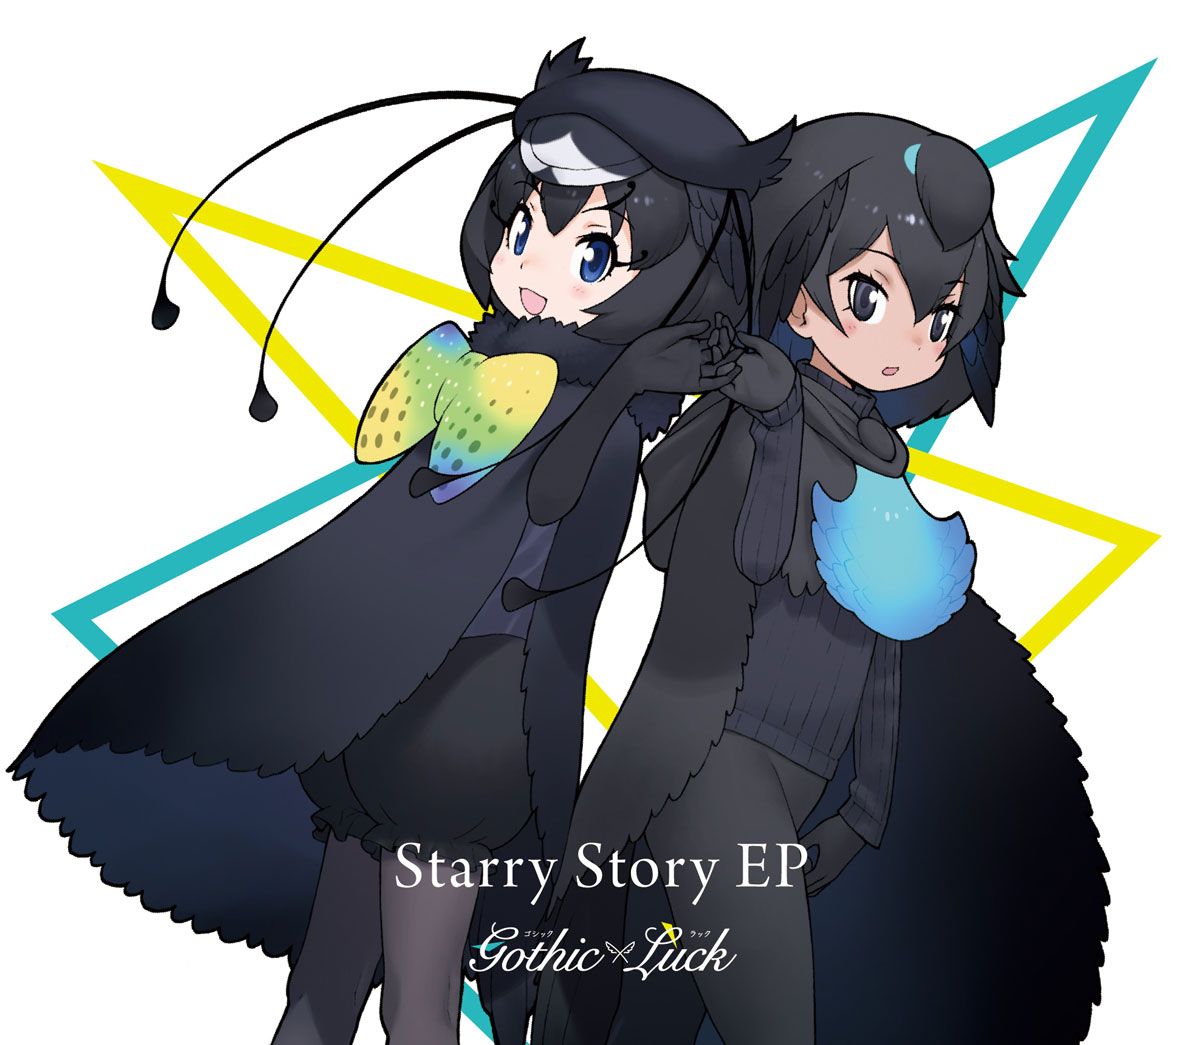 Starry Story EP (完全生産限定けものフレンズ盤)画像